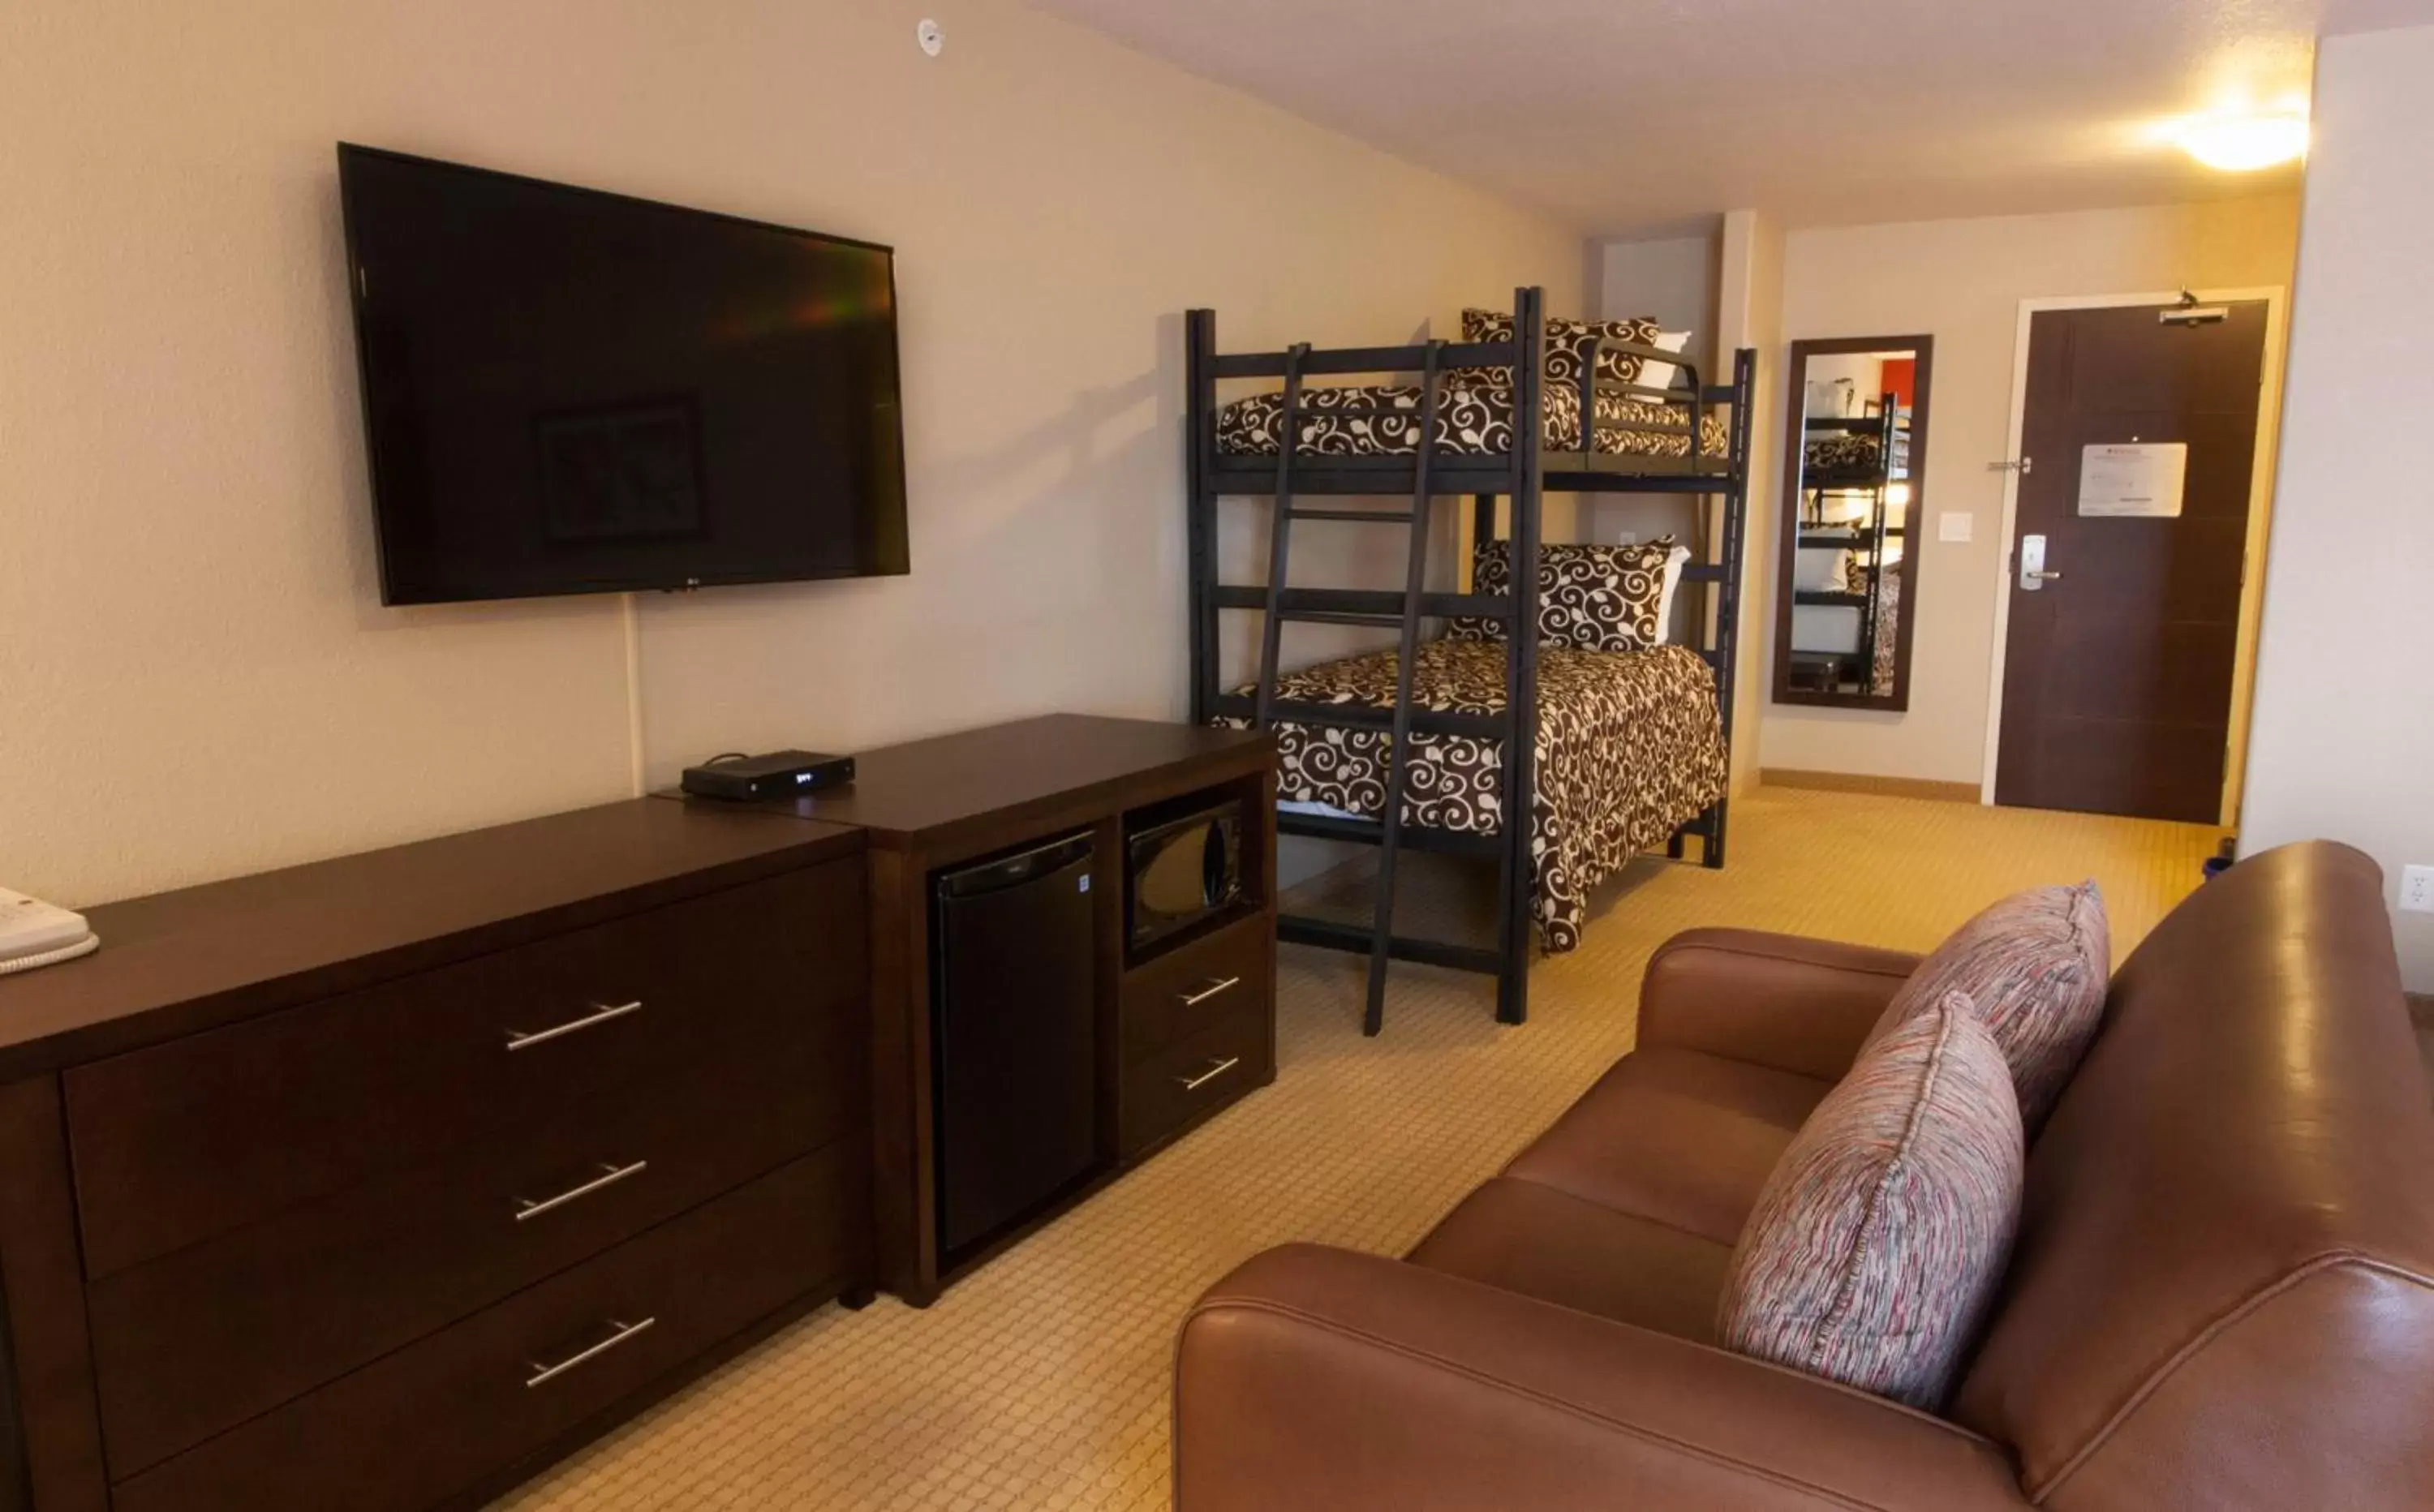 TV and multimedia in The Kanata Inns Invermere